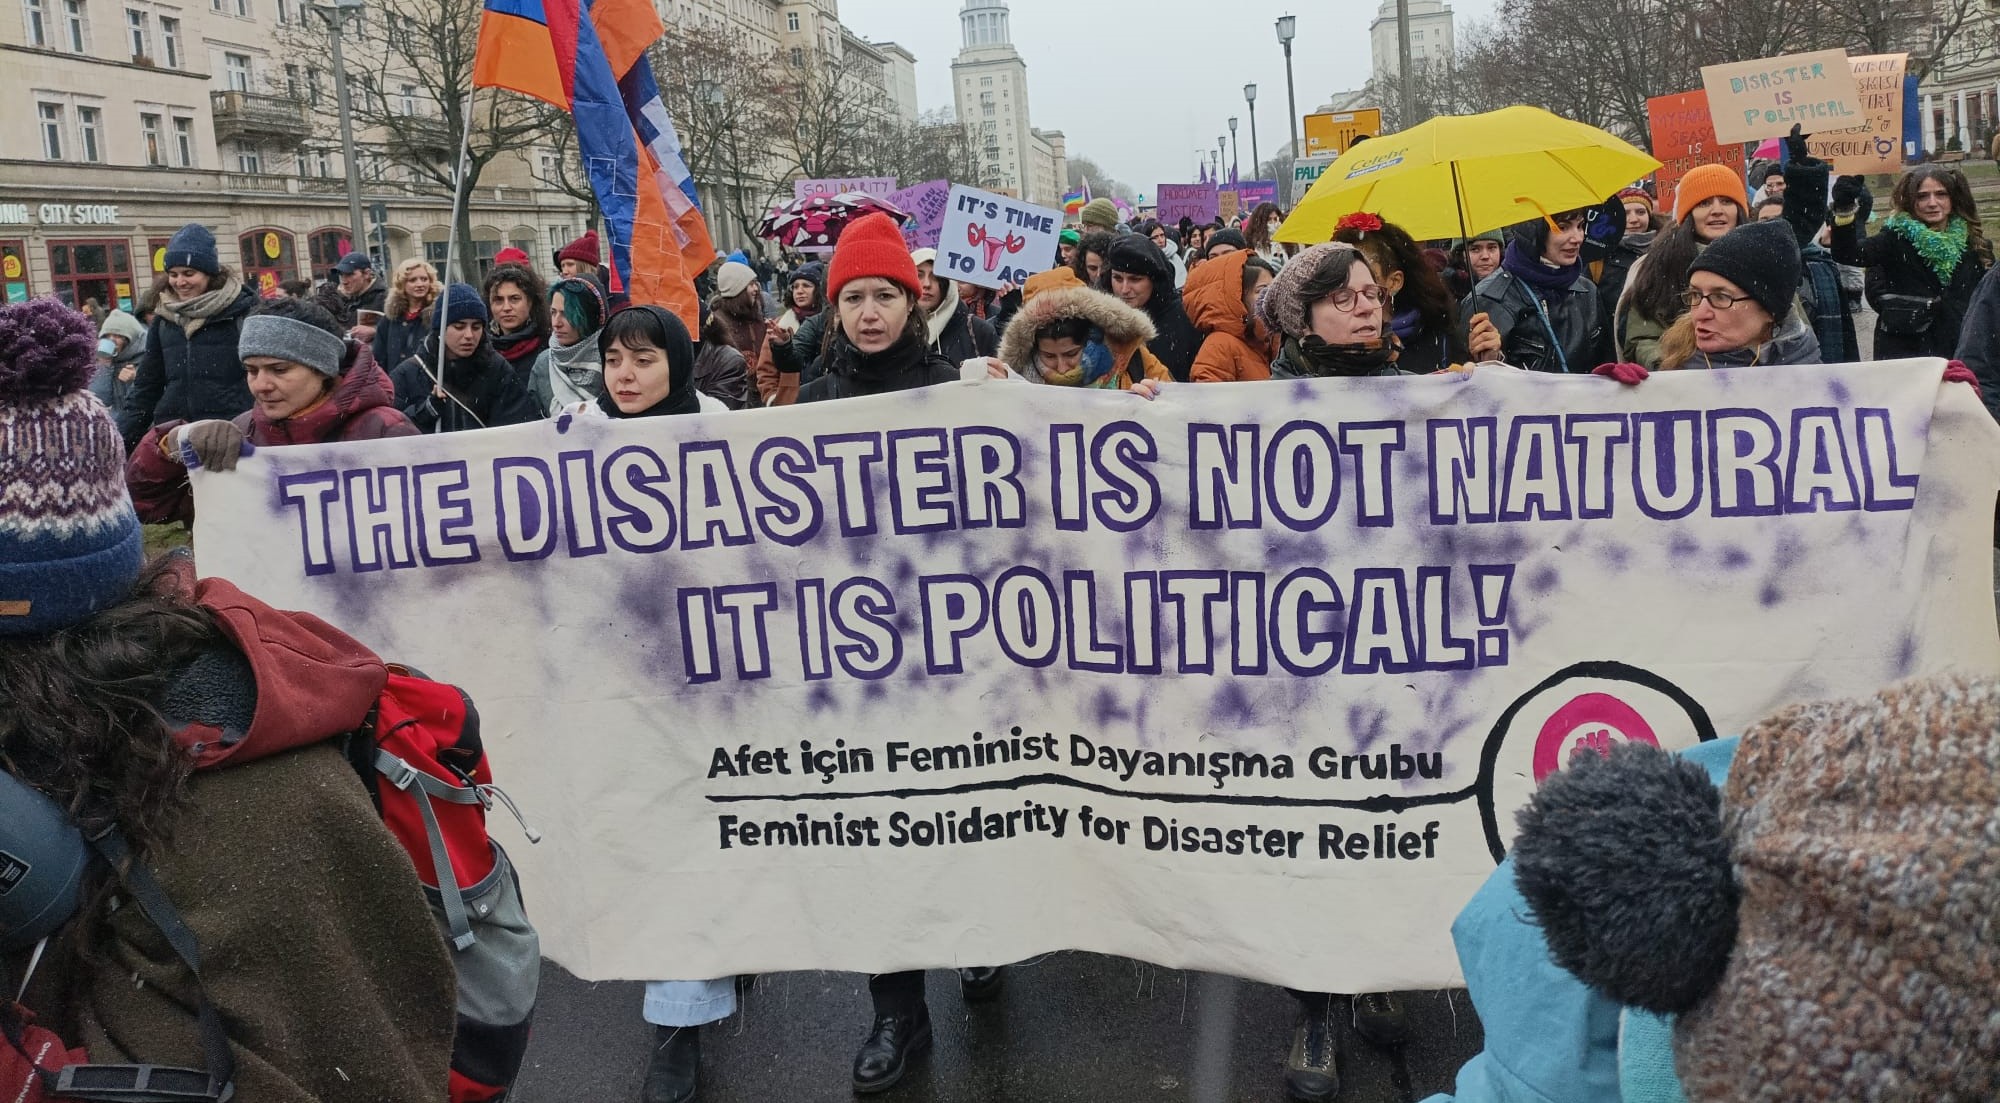 Feminist Solidarity for Disaster Relief